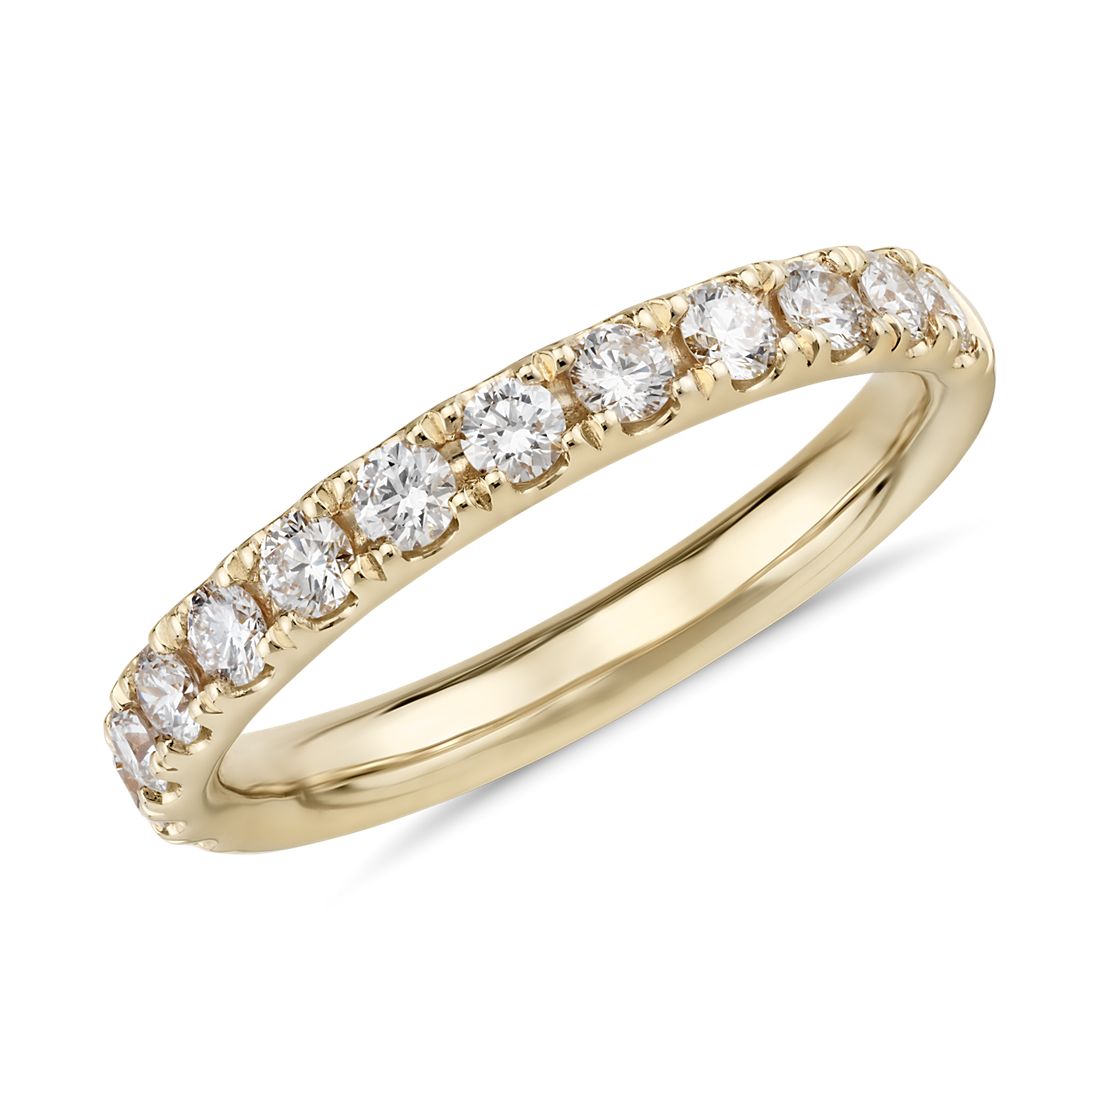 Riviera Pave Diamond Ring in 18k Yellow Gold (0.50 ct. tw.)